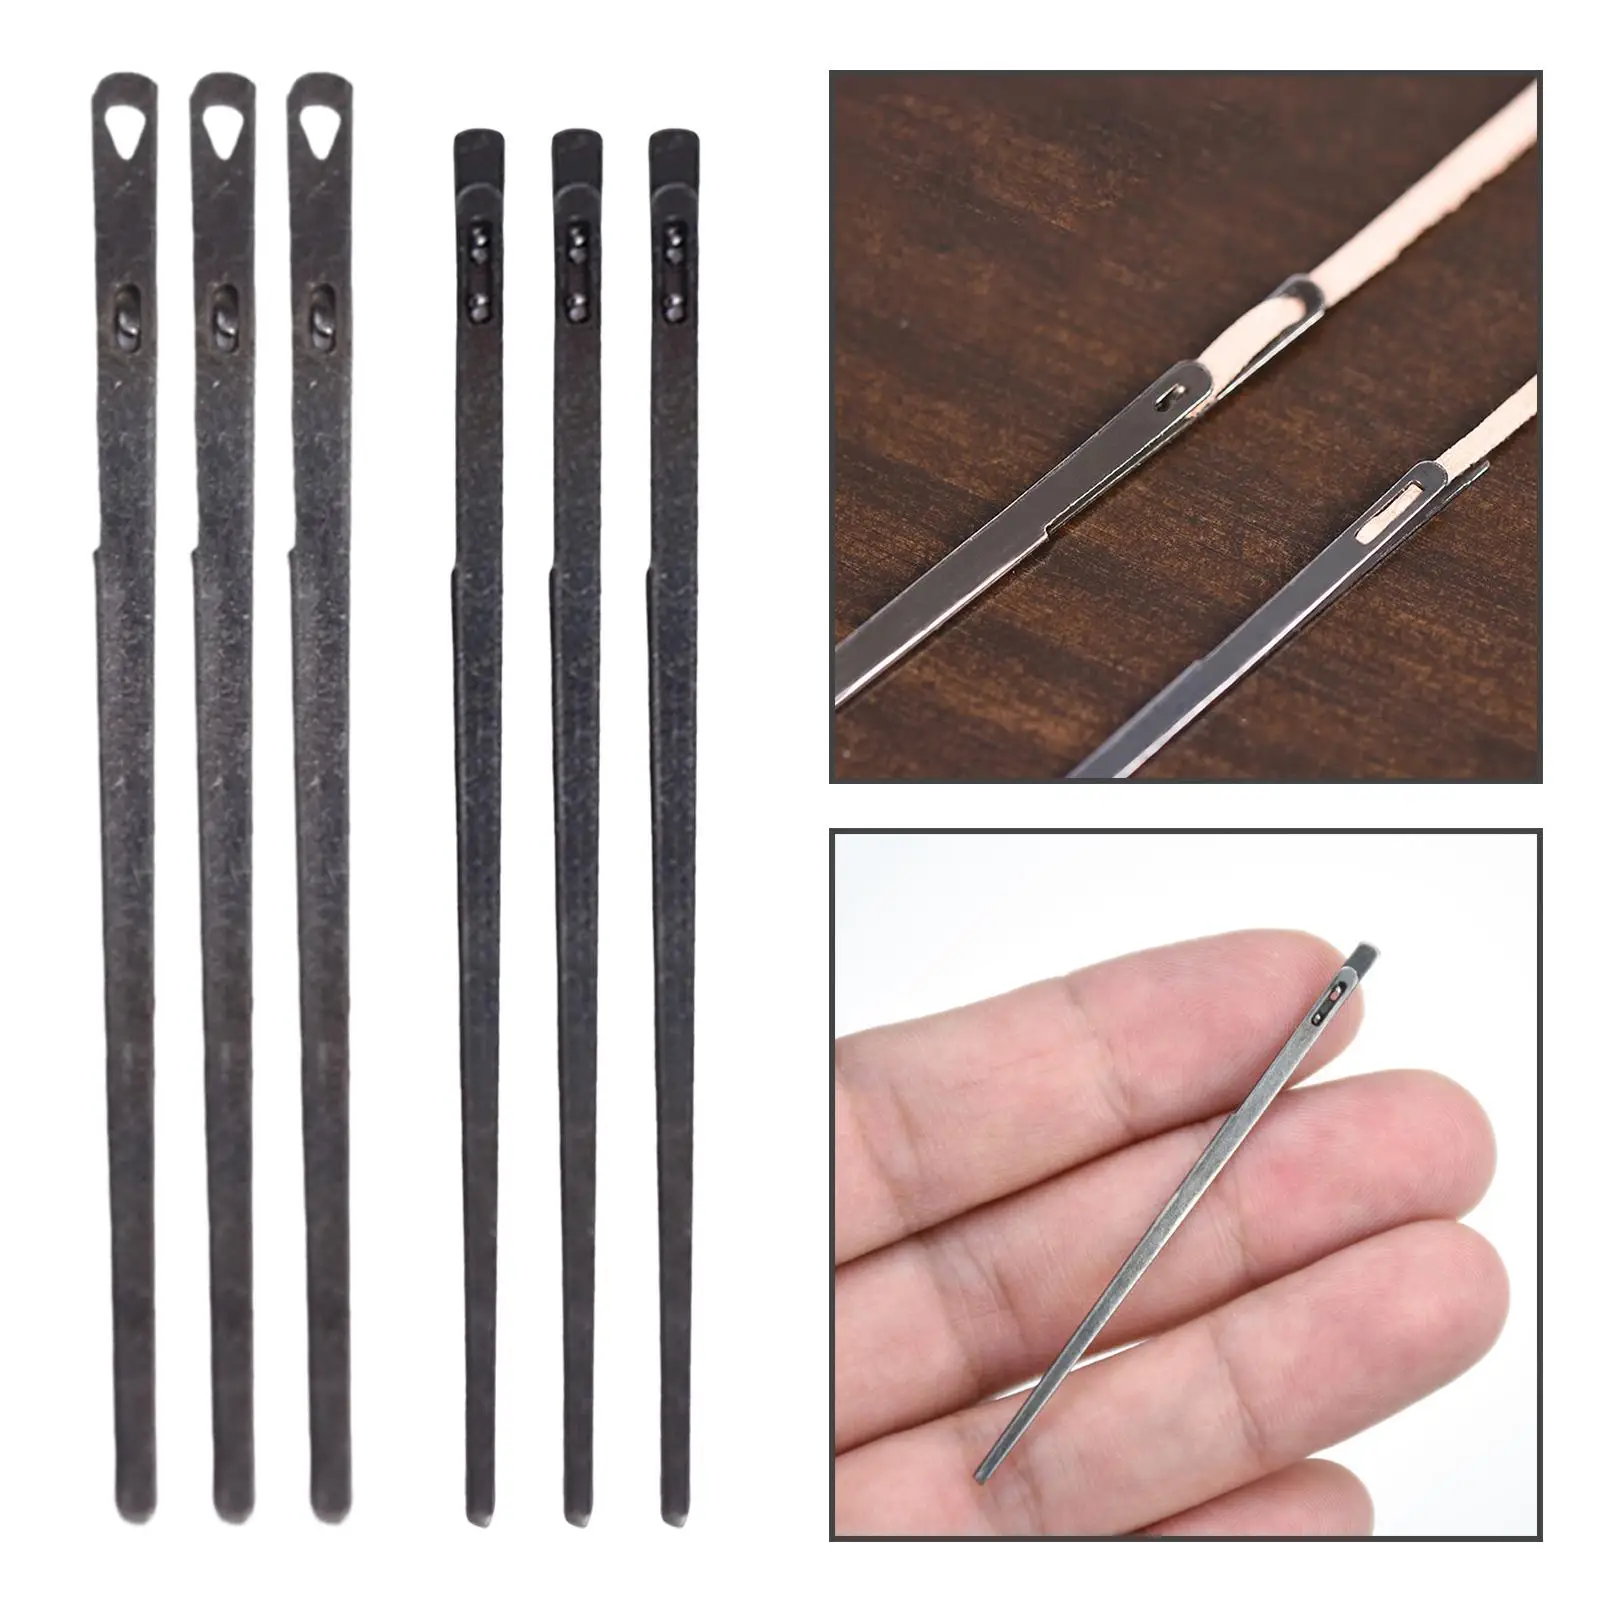 3Pcs Leather Lacing Needle Steel Leathercraft High Quality Handmade Repair for Fabric Painting Creative Gifts Needle Arts Crafts